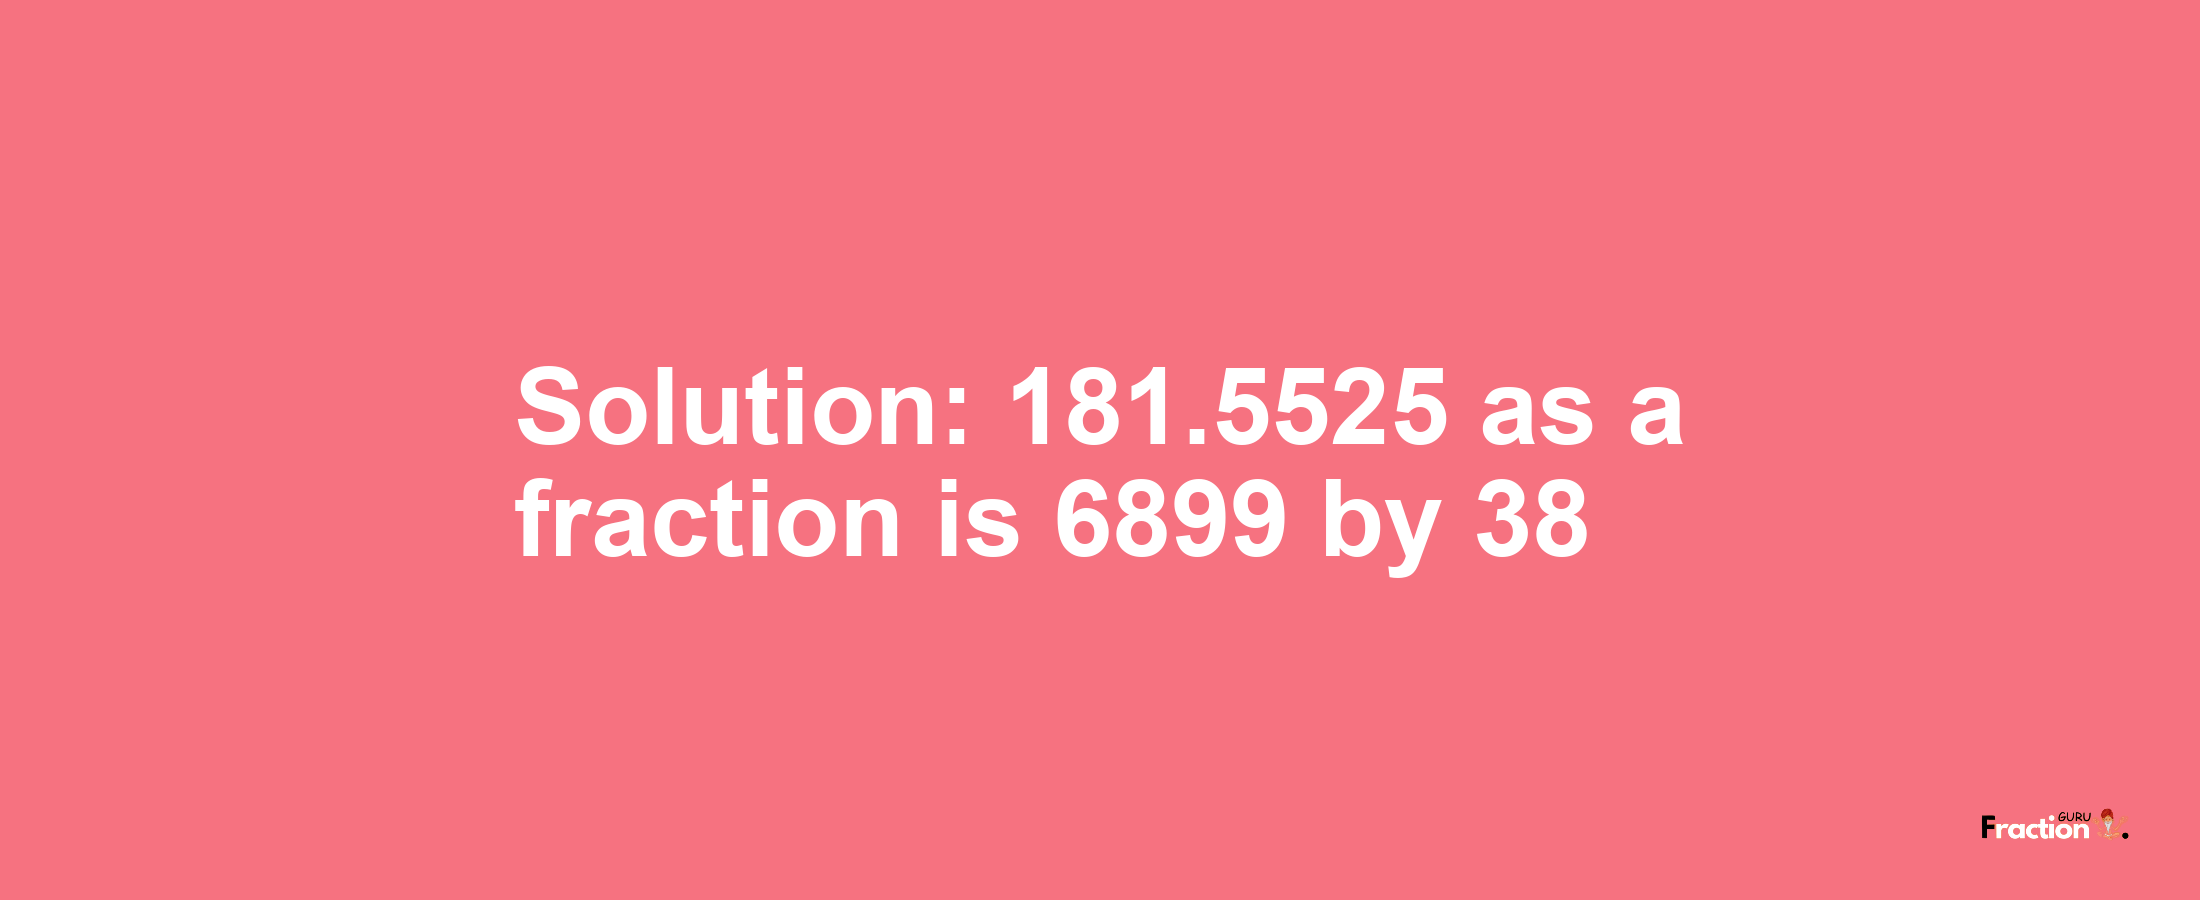 Solution:181.5525 as a fraction is 6899/38